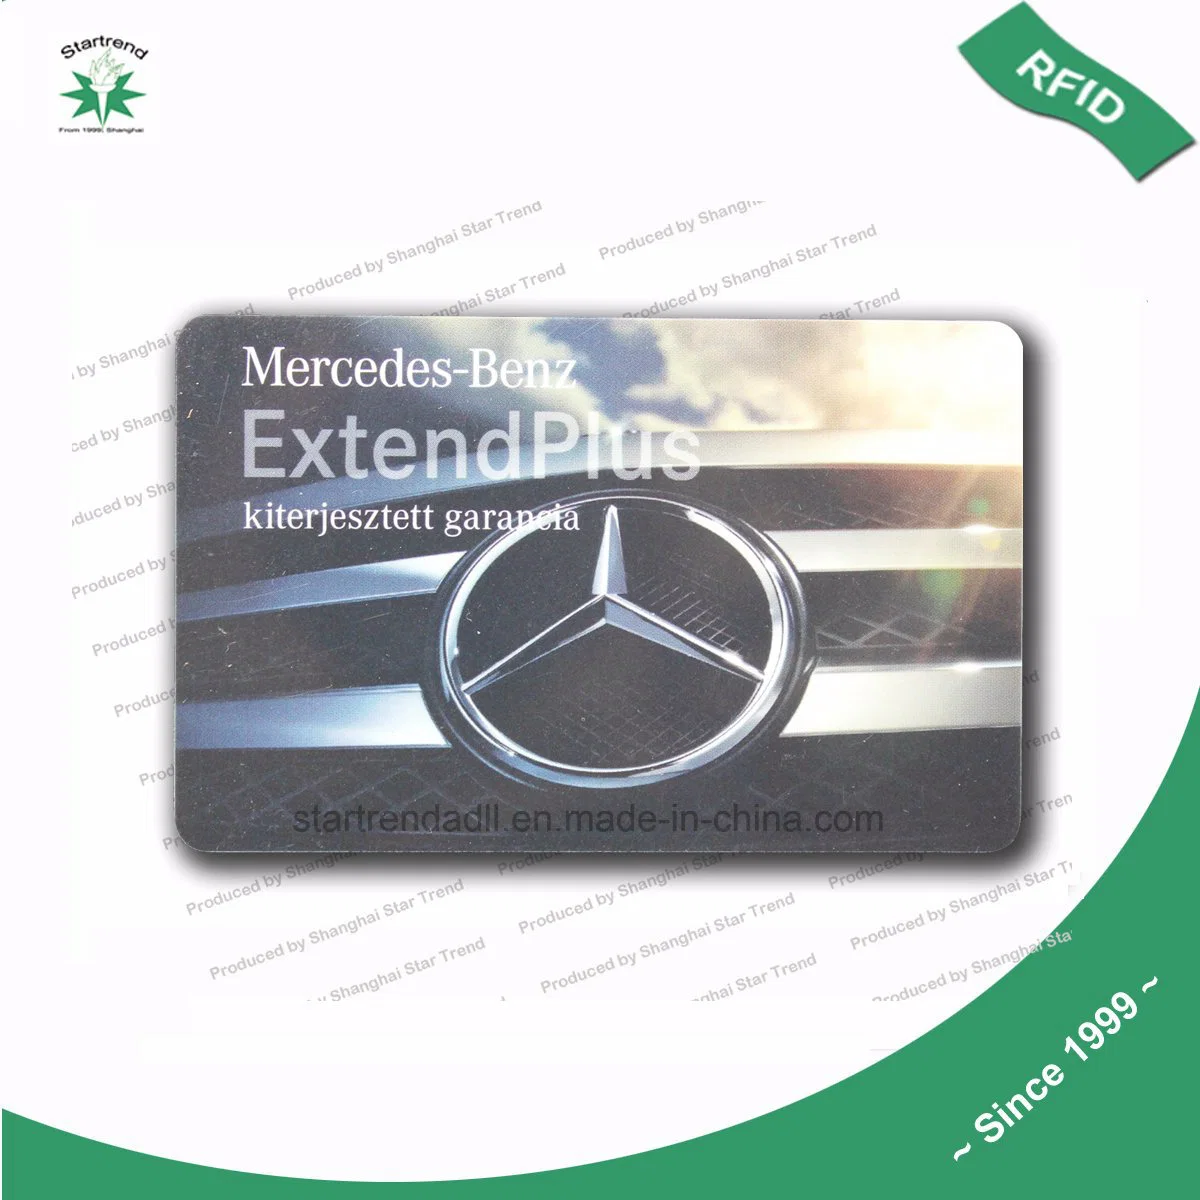 Card - PVC Card/Plastic Card Used as Membership Card/Business Card/Gift Card/Prepaid Card/Loyalty Card/Hotel Key Tag/ATM Card with Magnetic Strip/Hot Stamp/Chip